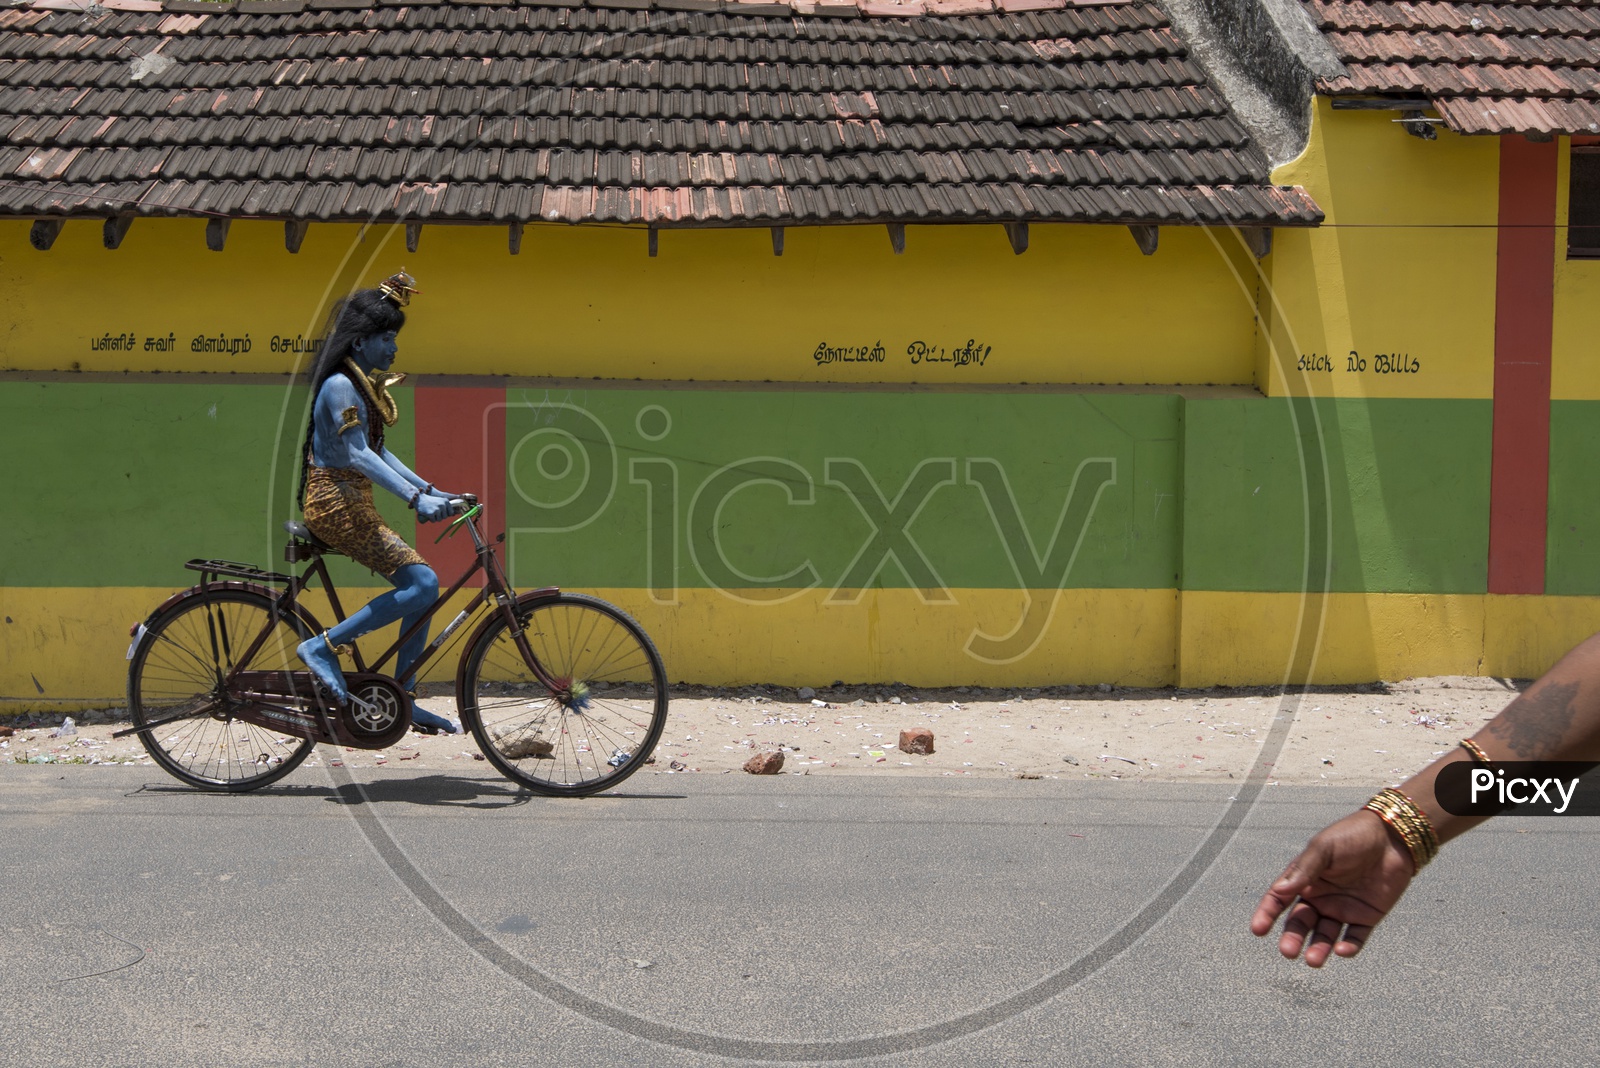 An Indian Boy In Lord Shiva Getup Riding a Bicycle